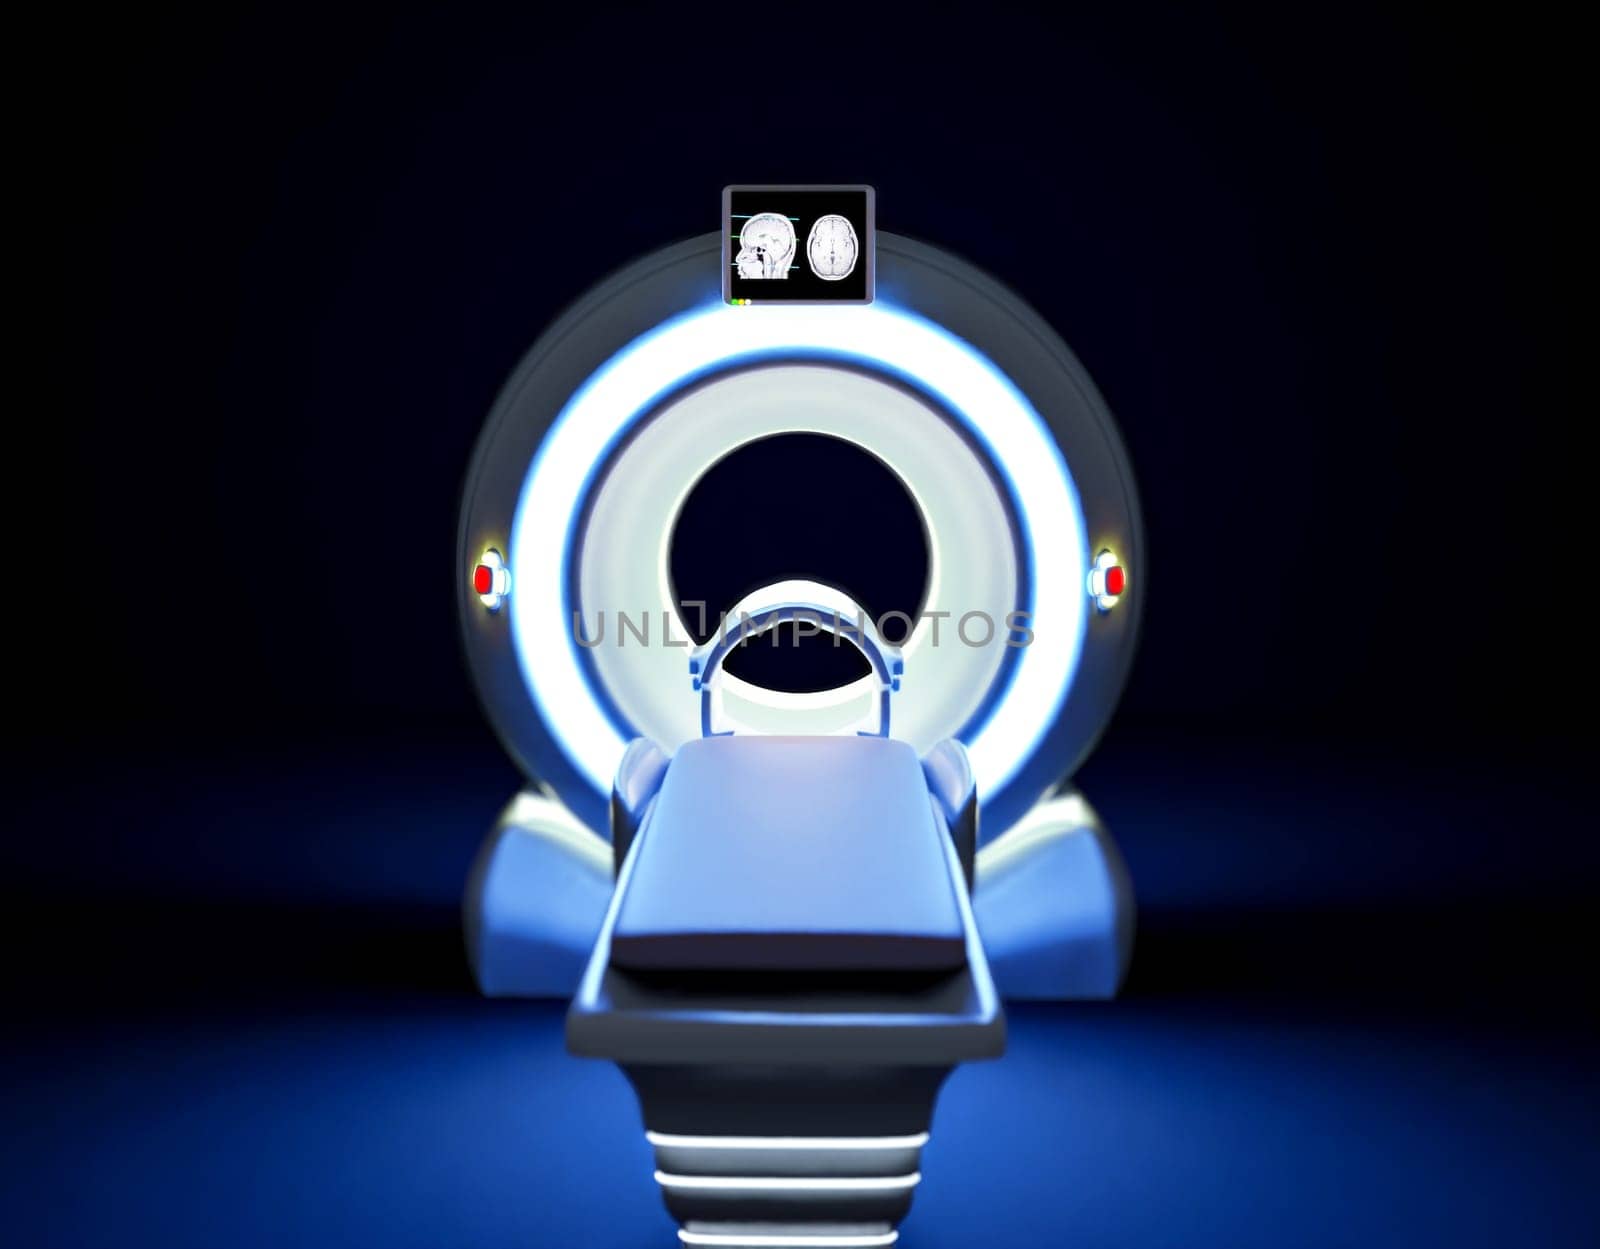 Fronr view of MRI SCANNER - Magnetic resonance imaging  device in Hospital 3D rendering  . Medical Equipment and Health Care background. by samunella